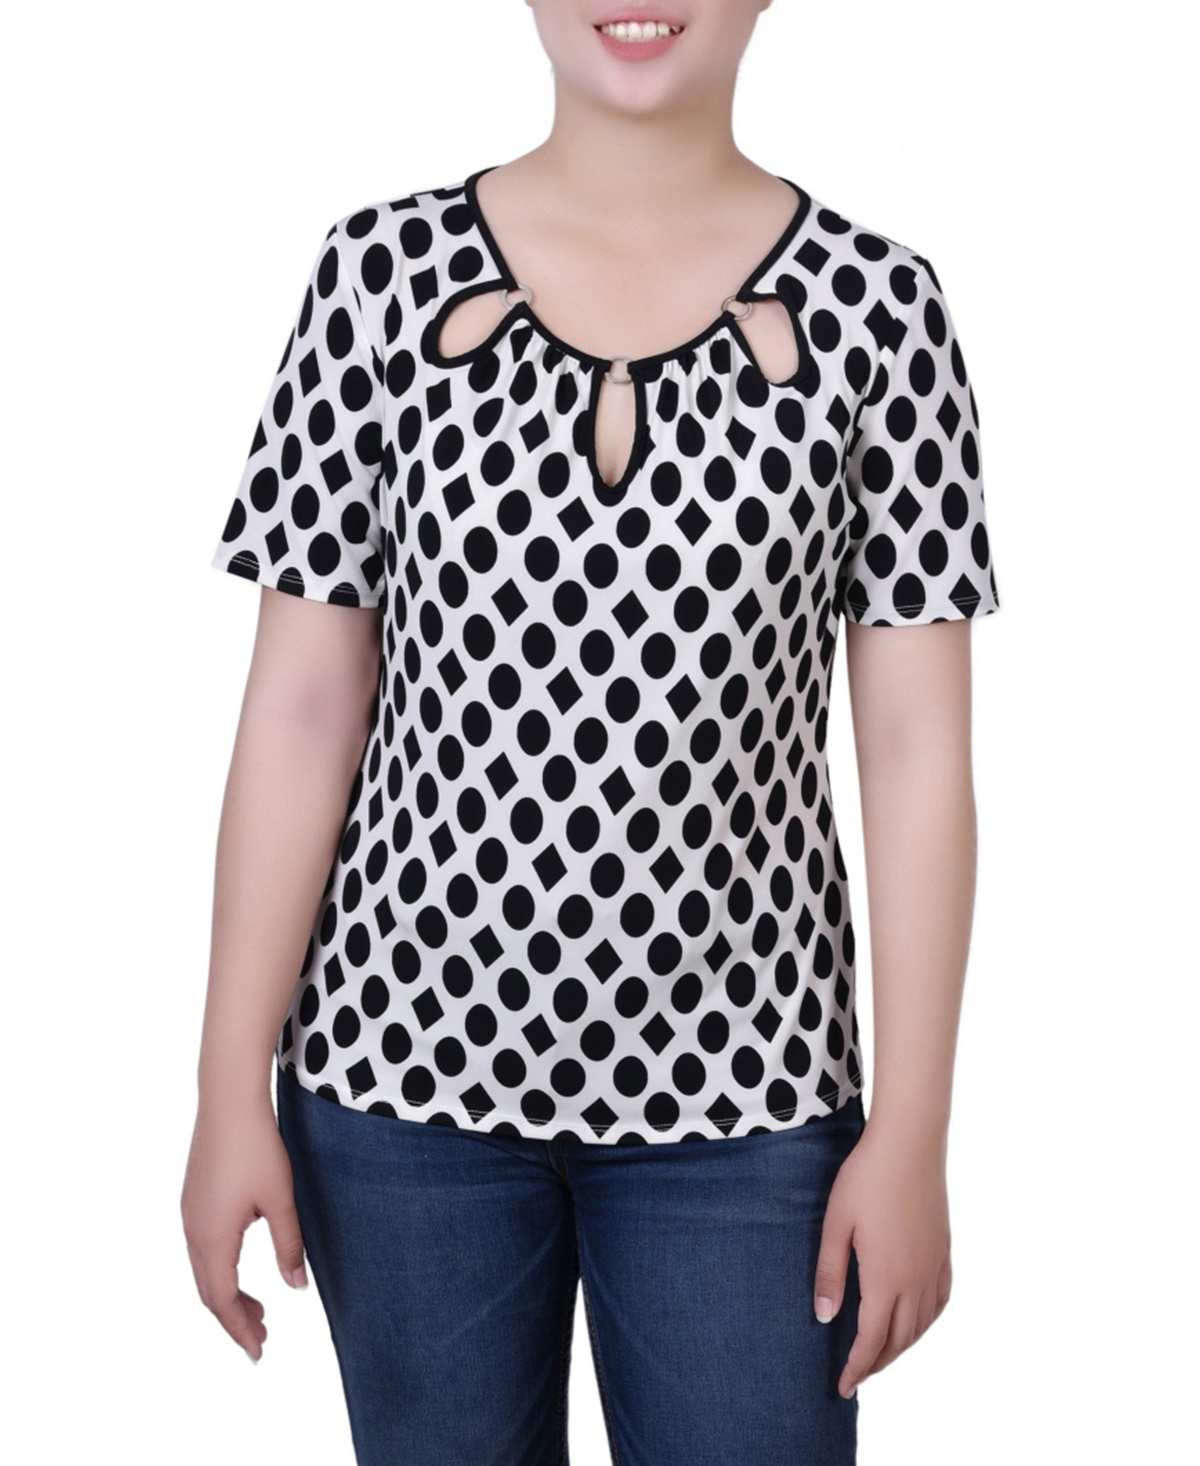 Women's Short Sleeve Top with Ring Details - Circles and Diamonds